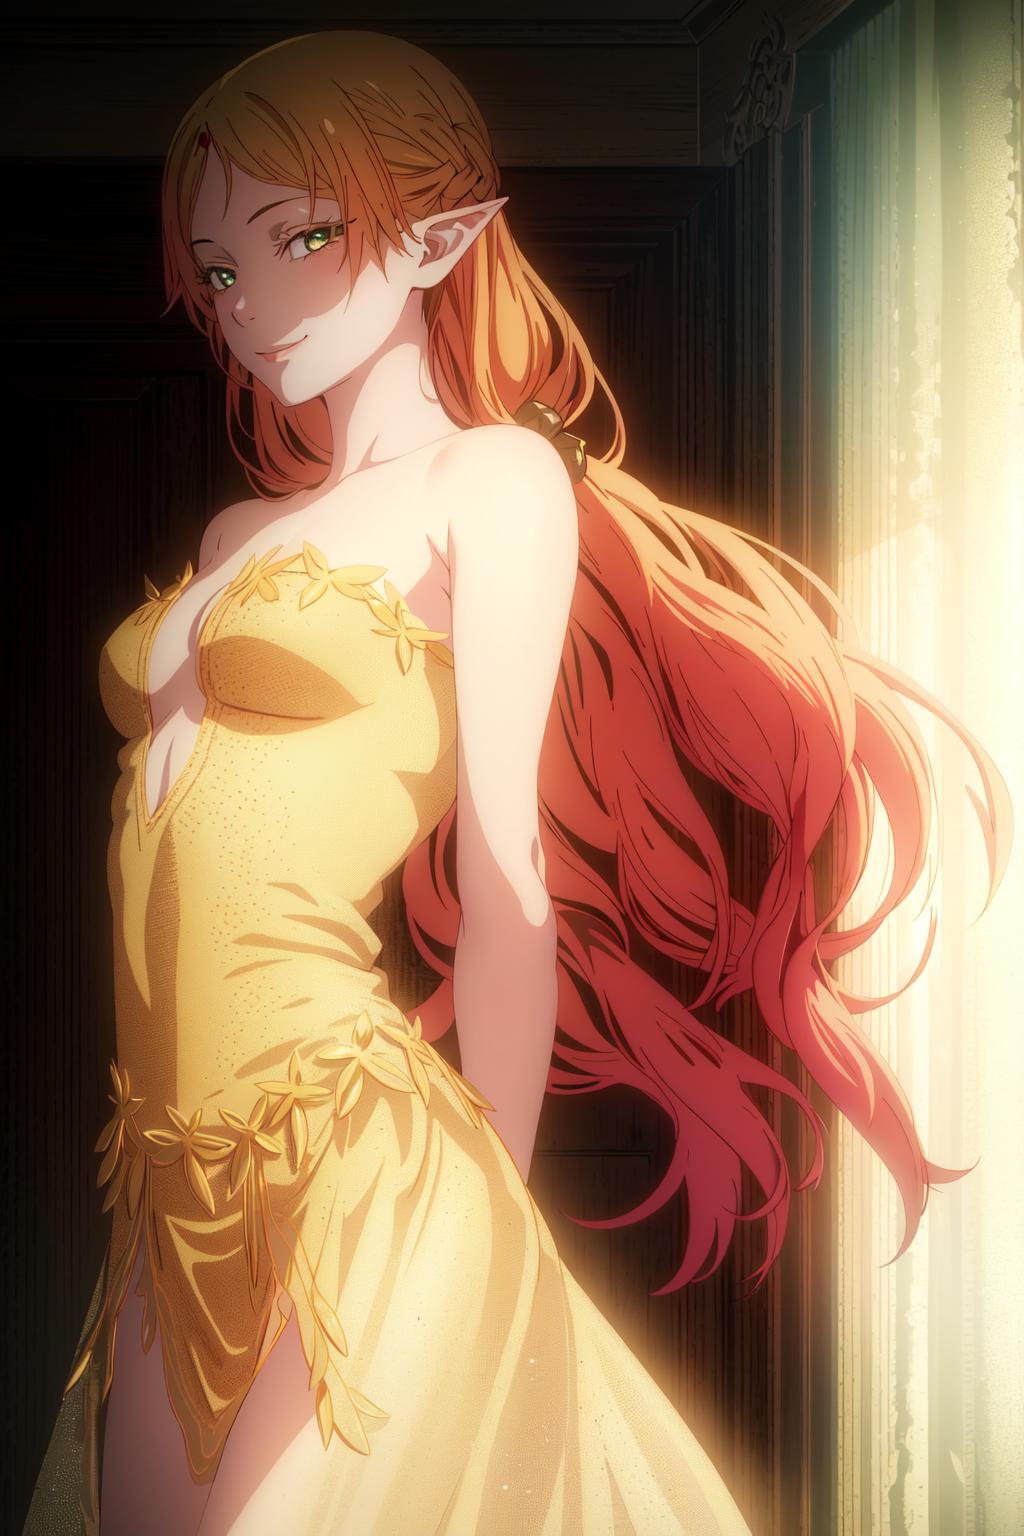 Anime Character with Yellow Dress and Red Hair.